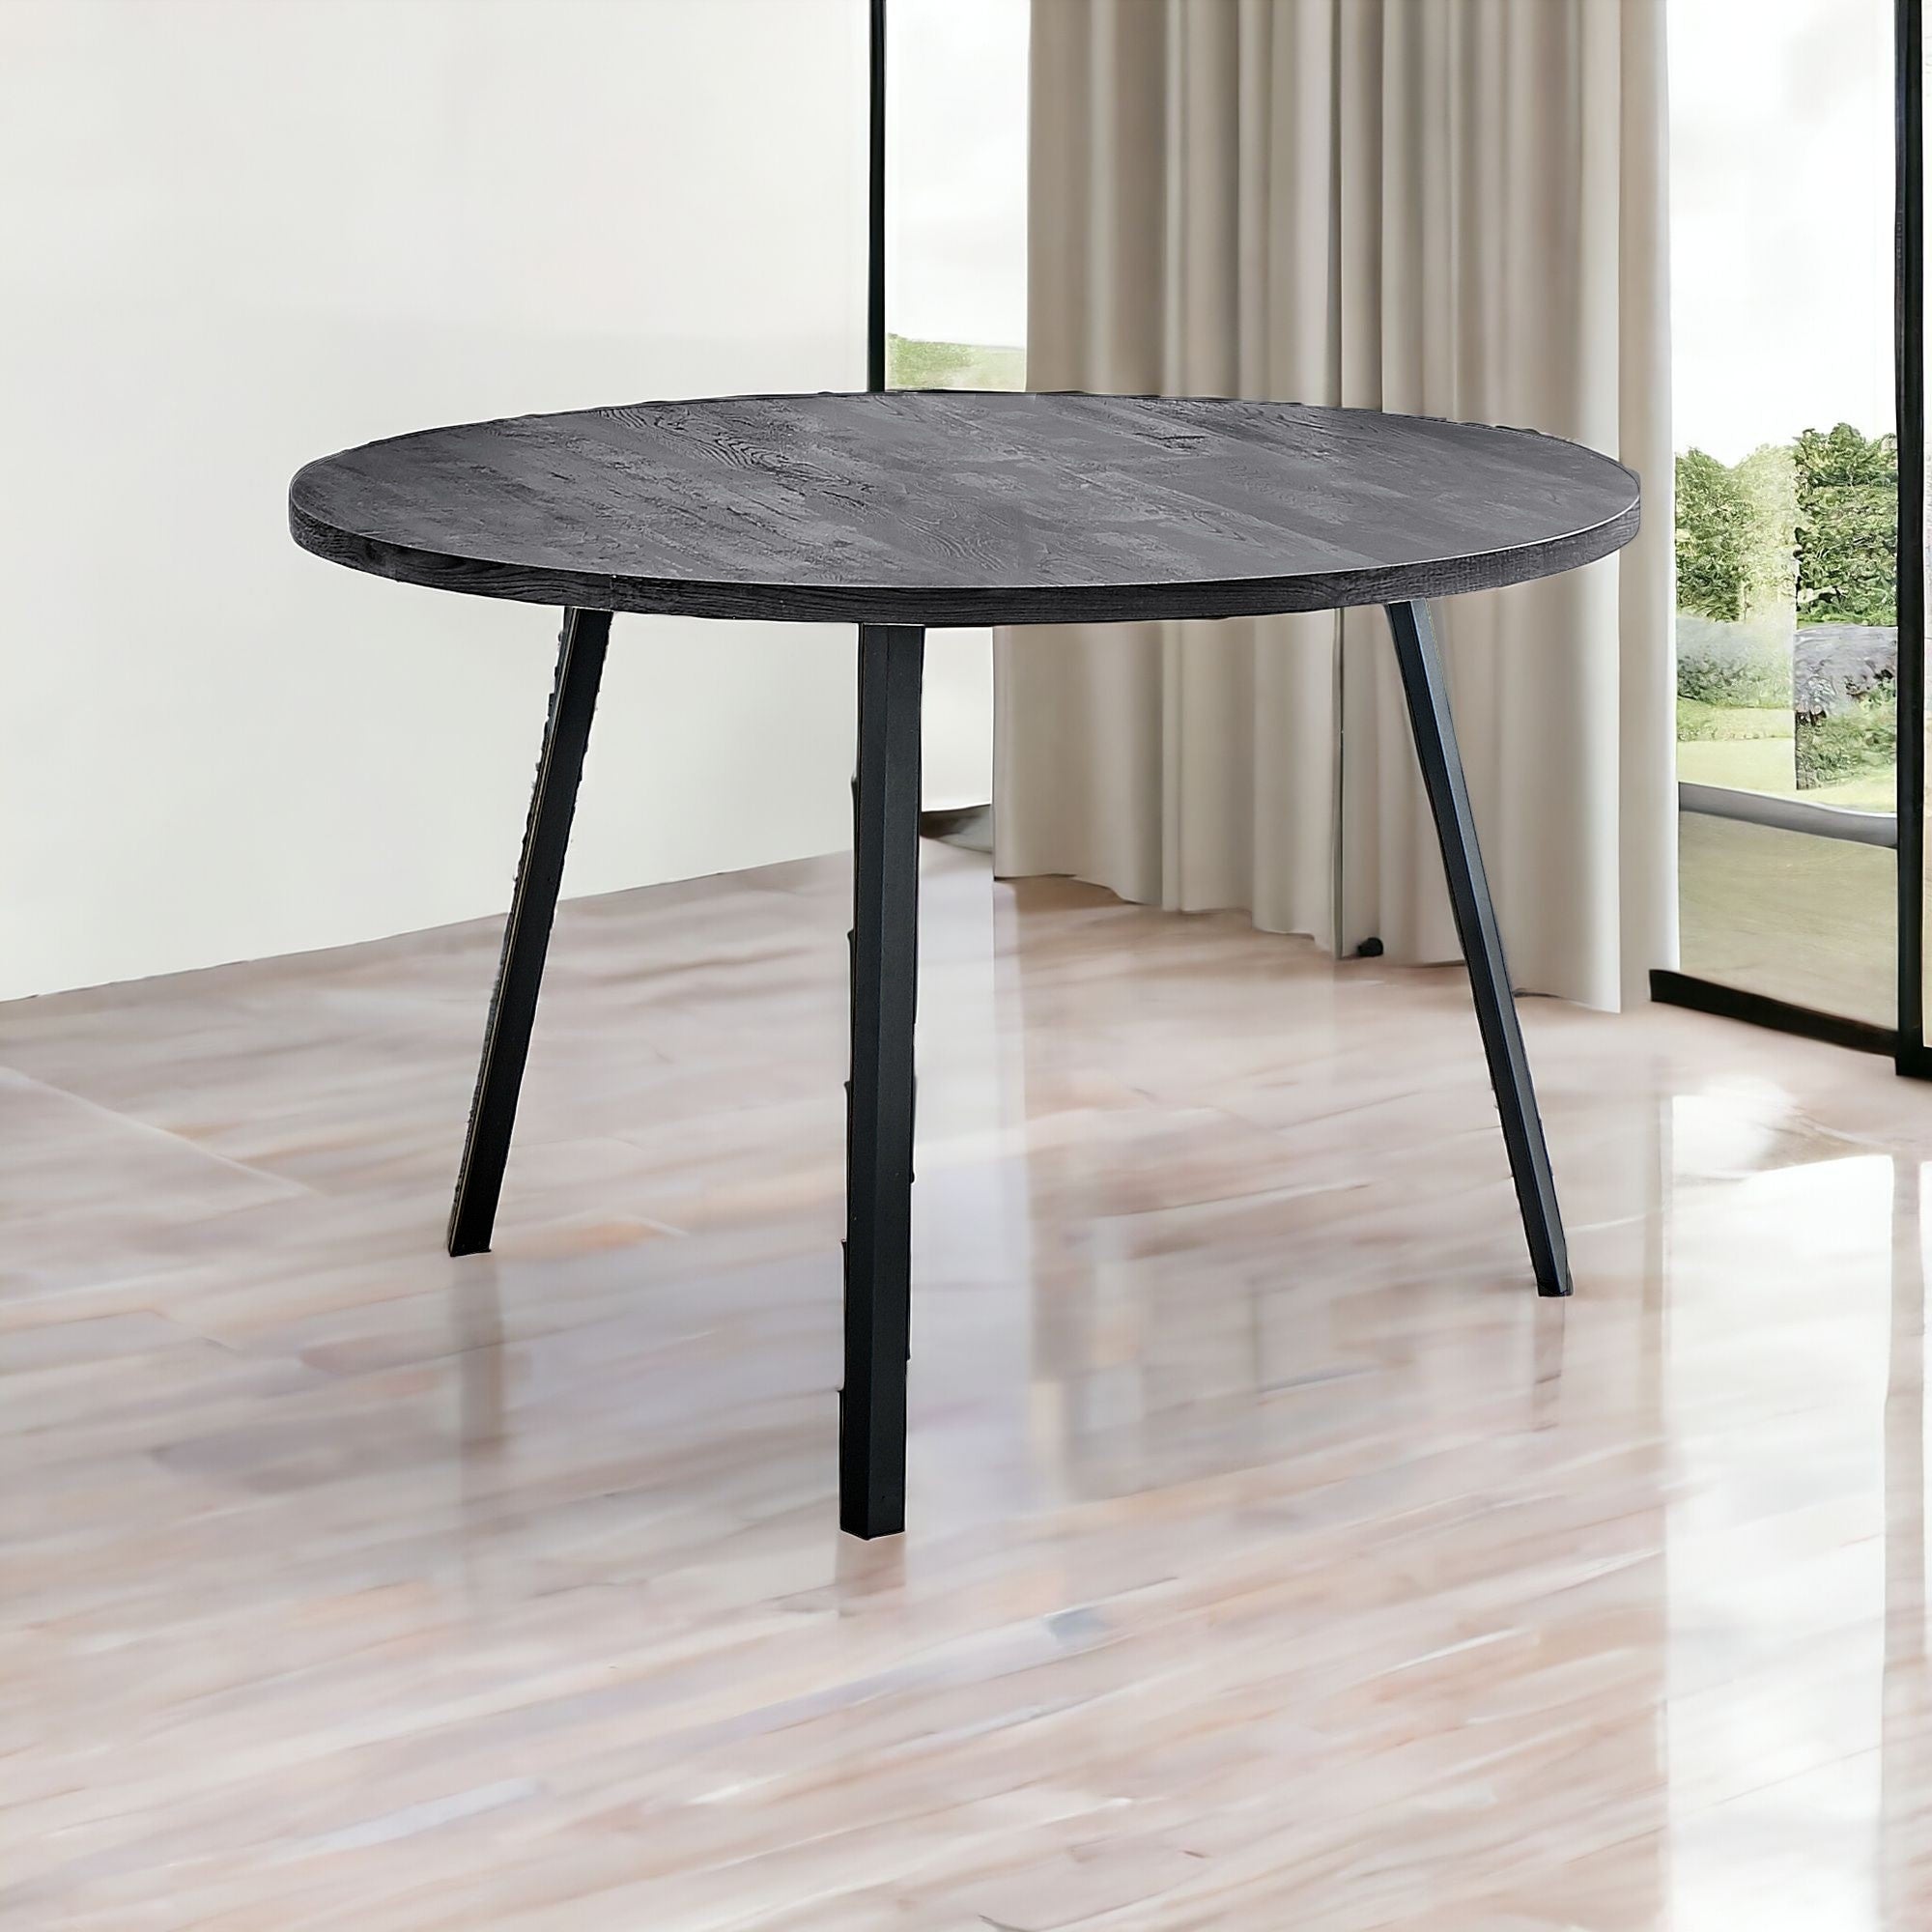 48" Round Dining Room Table With Black Reclaimed Wood And Black Metal